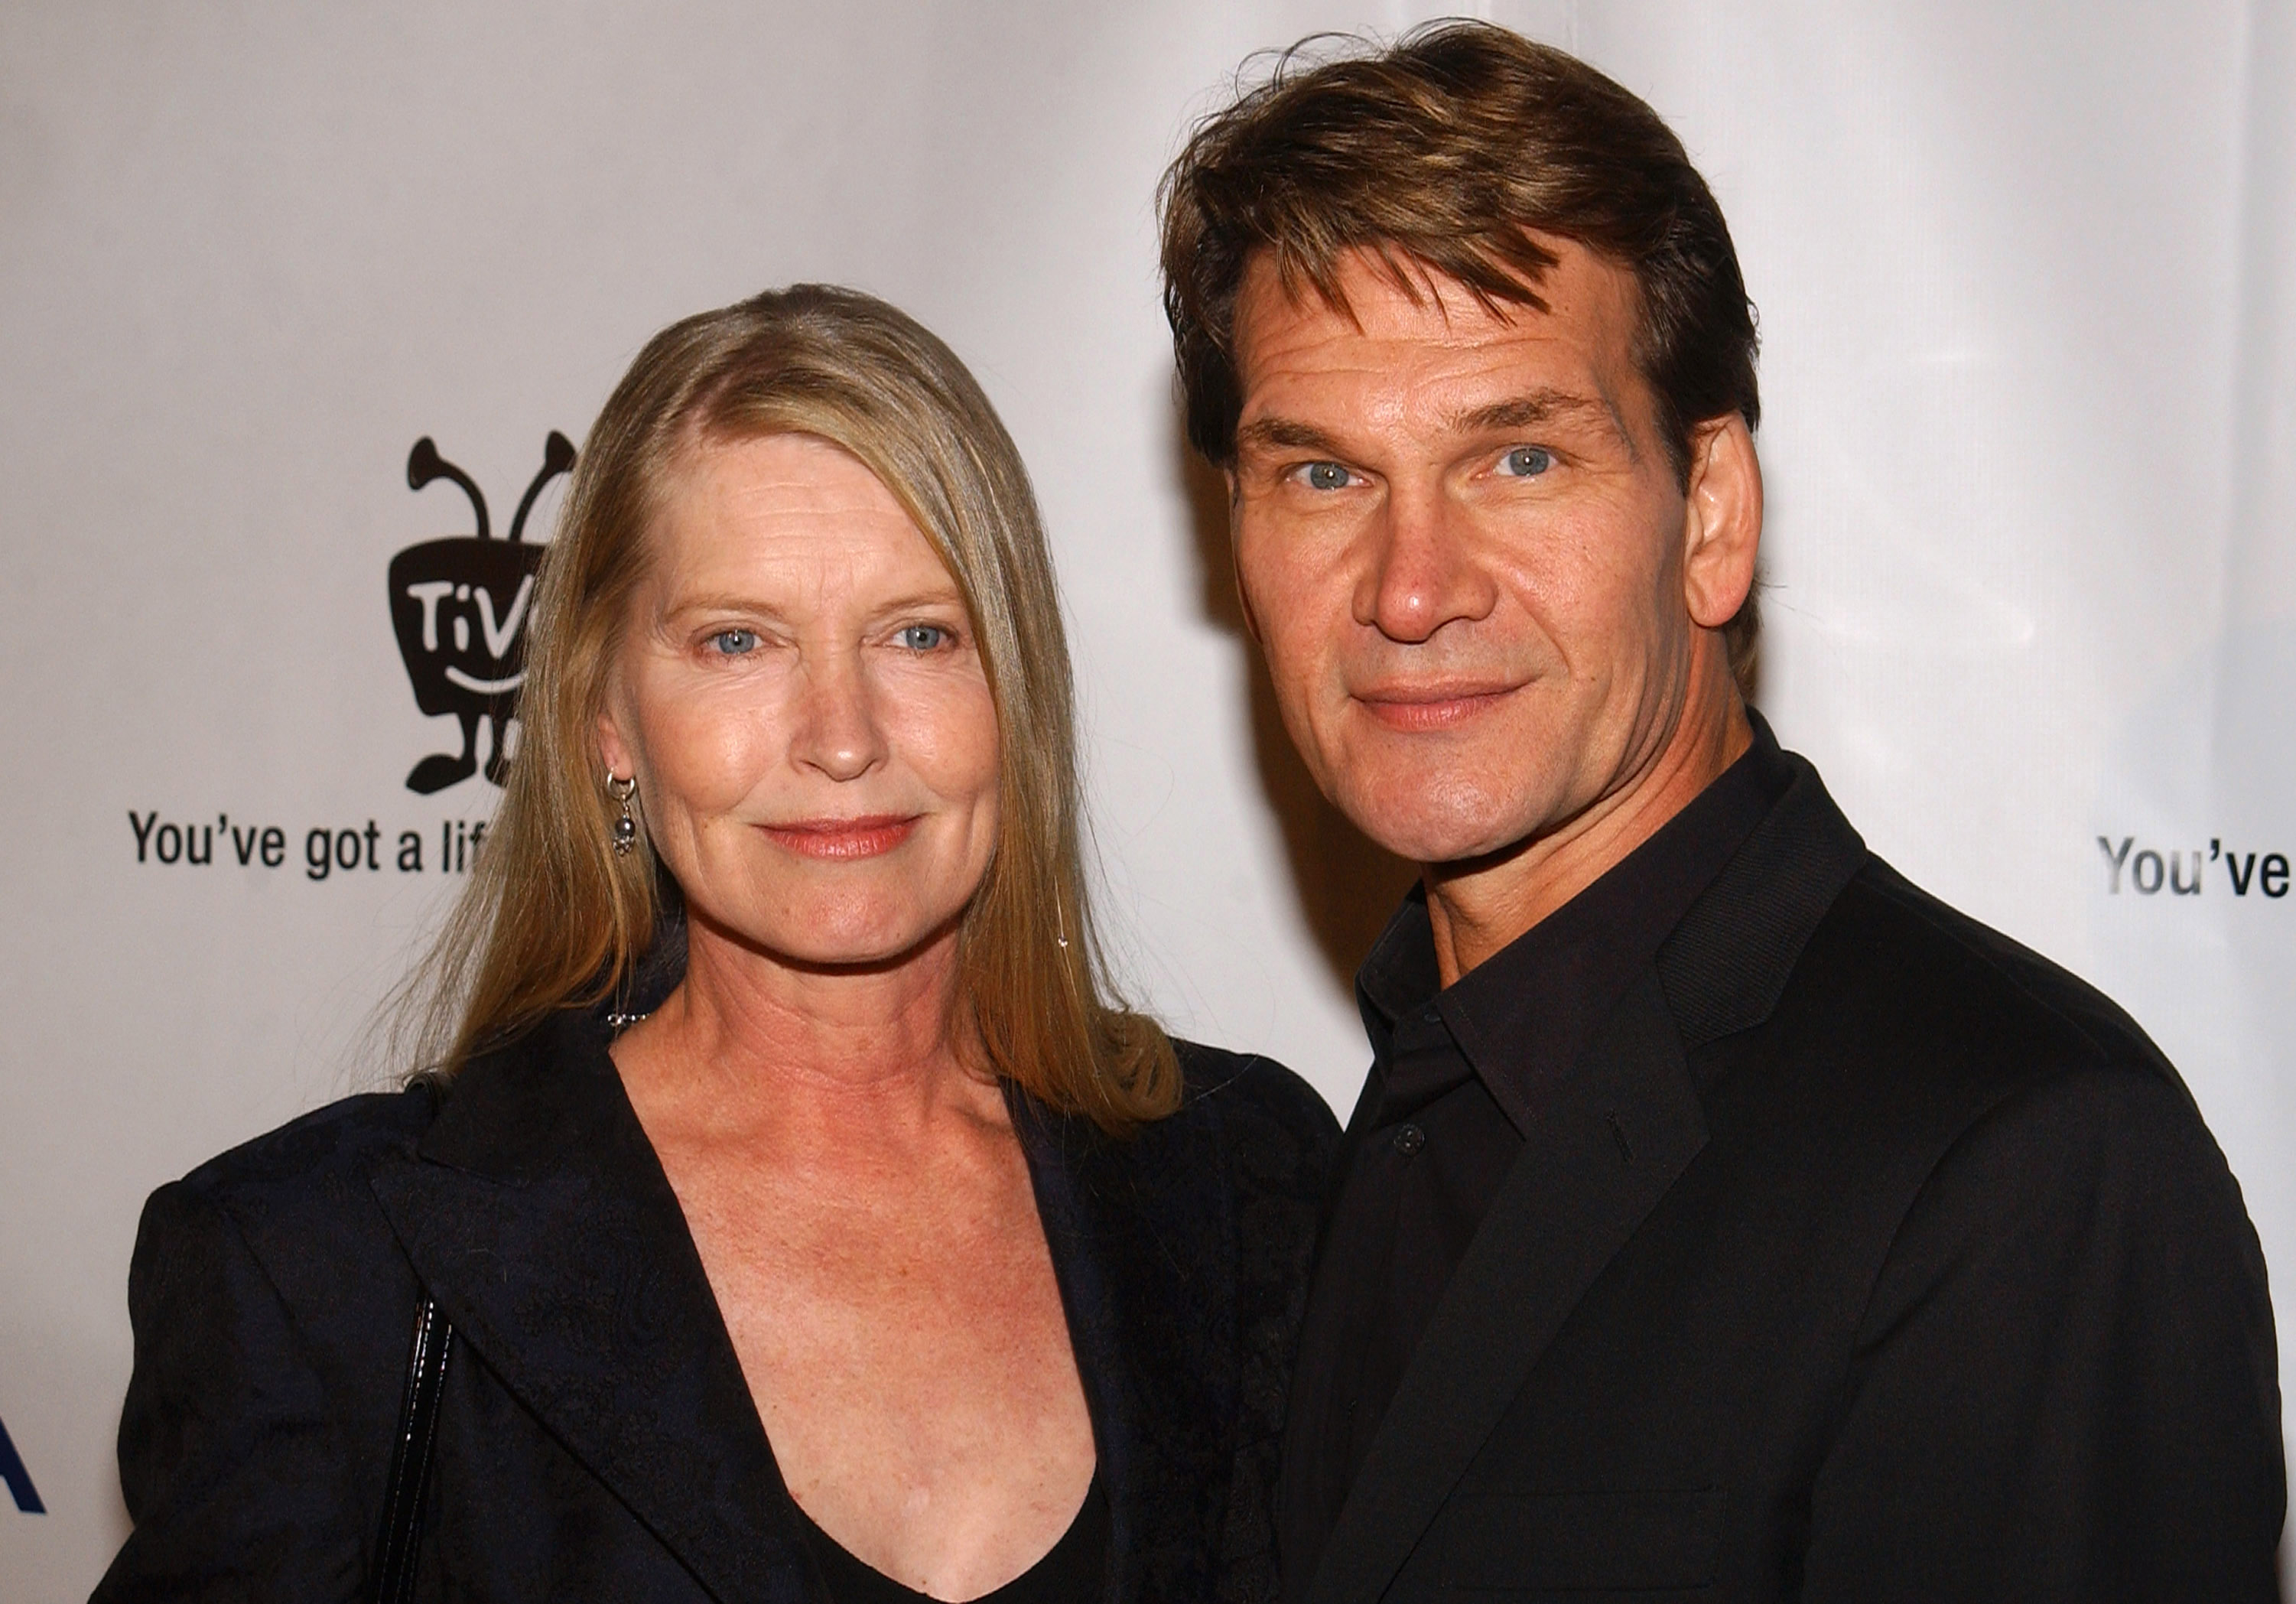 Lisa Niemi and Patrick Swayze at Esquire House in Beverly Hills, California, on November 11, 2004 | Source: Getty Images